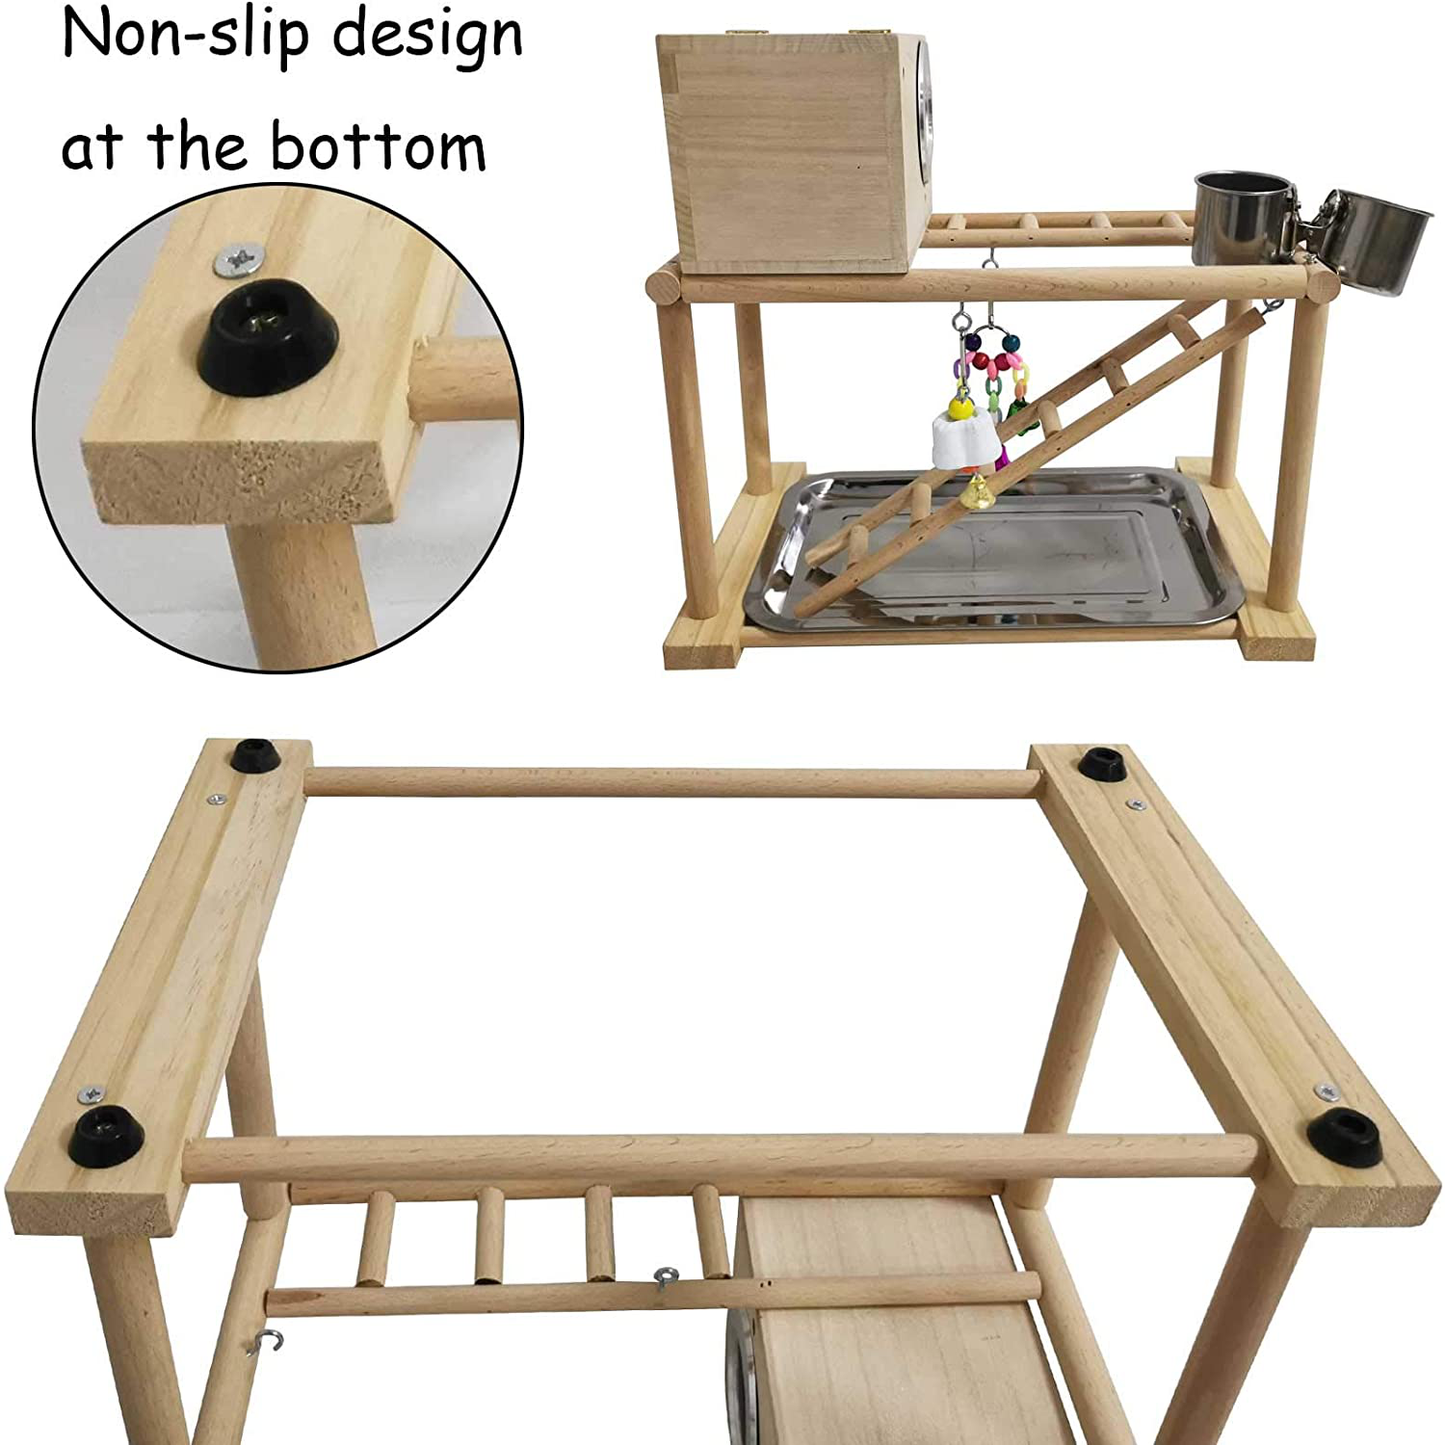 Kathson Parrots Playground Bird Playstand Birdcage Play Stand Wood Perch Gym Playpen with Parakeet Nest Box Ladder Feeder Cups Chewing Toys Exercise Activity Center for Conure Cockatiel Lovebirds Animals & Pet Supplies > Pet Supplies > Bird Supplies > Bird Gyms & Playstands kathson   